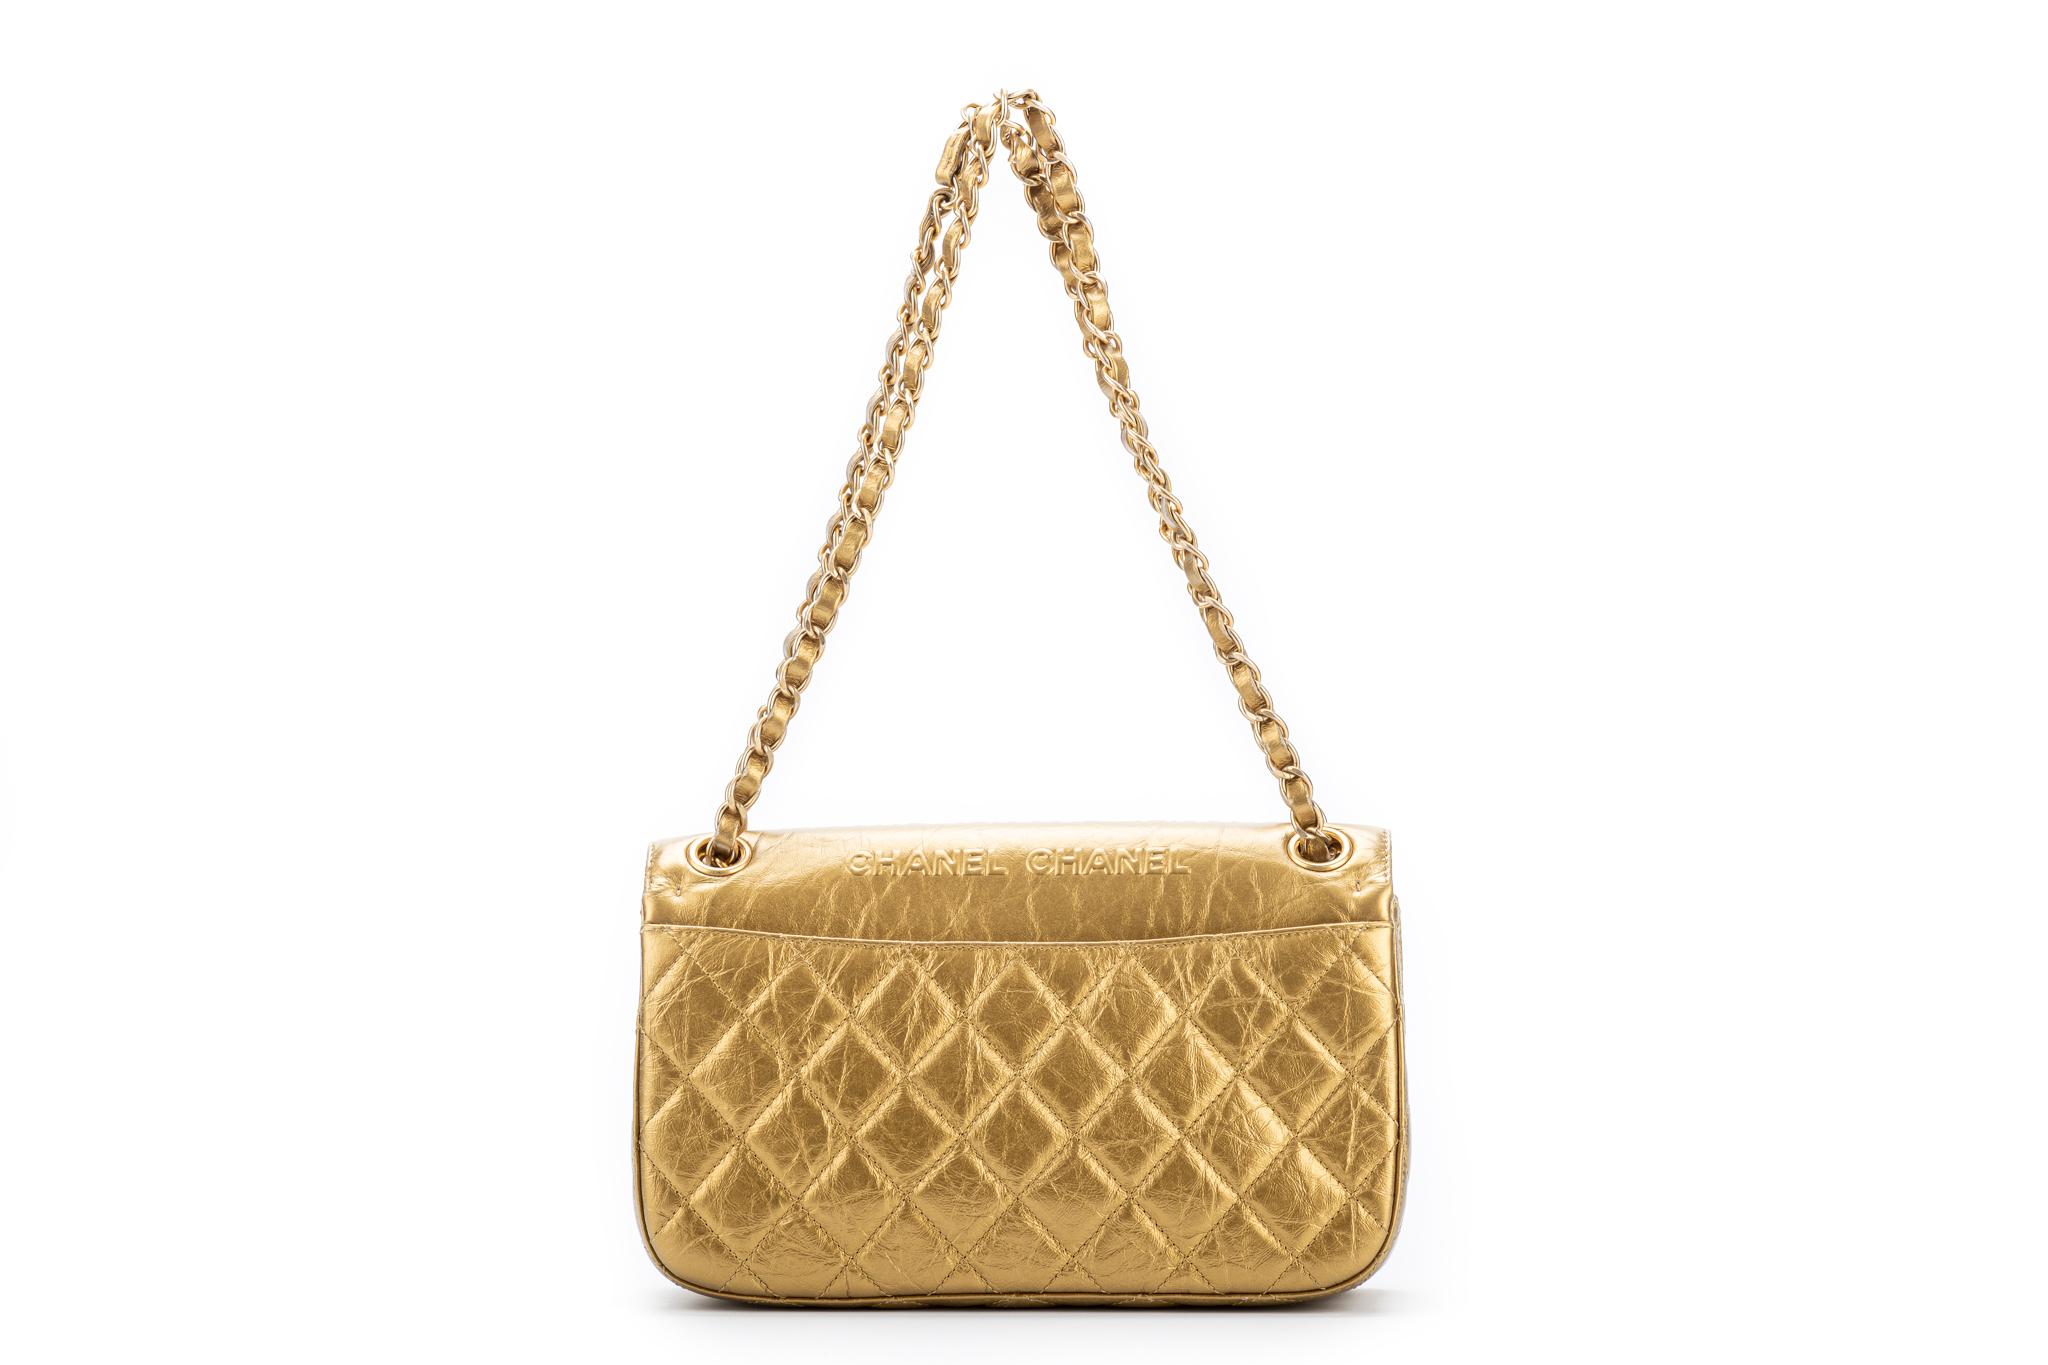 Brown New Chanel Rare Gold Embossed Single Flap Bag